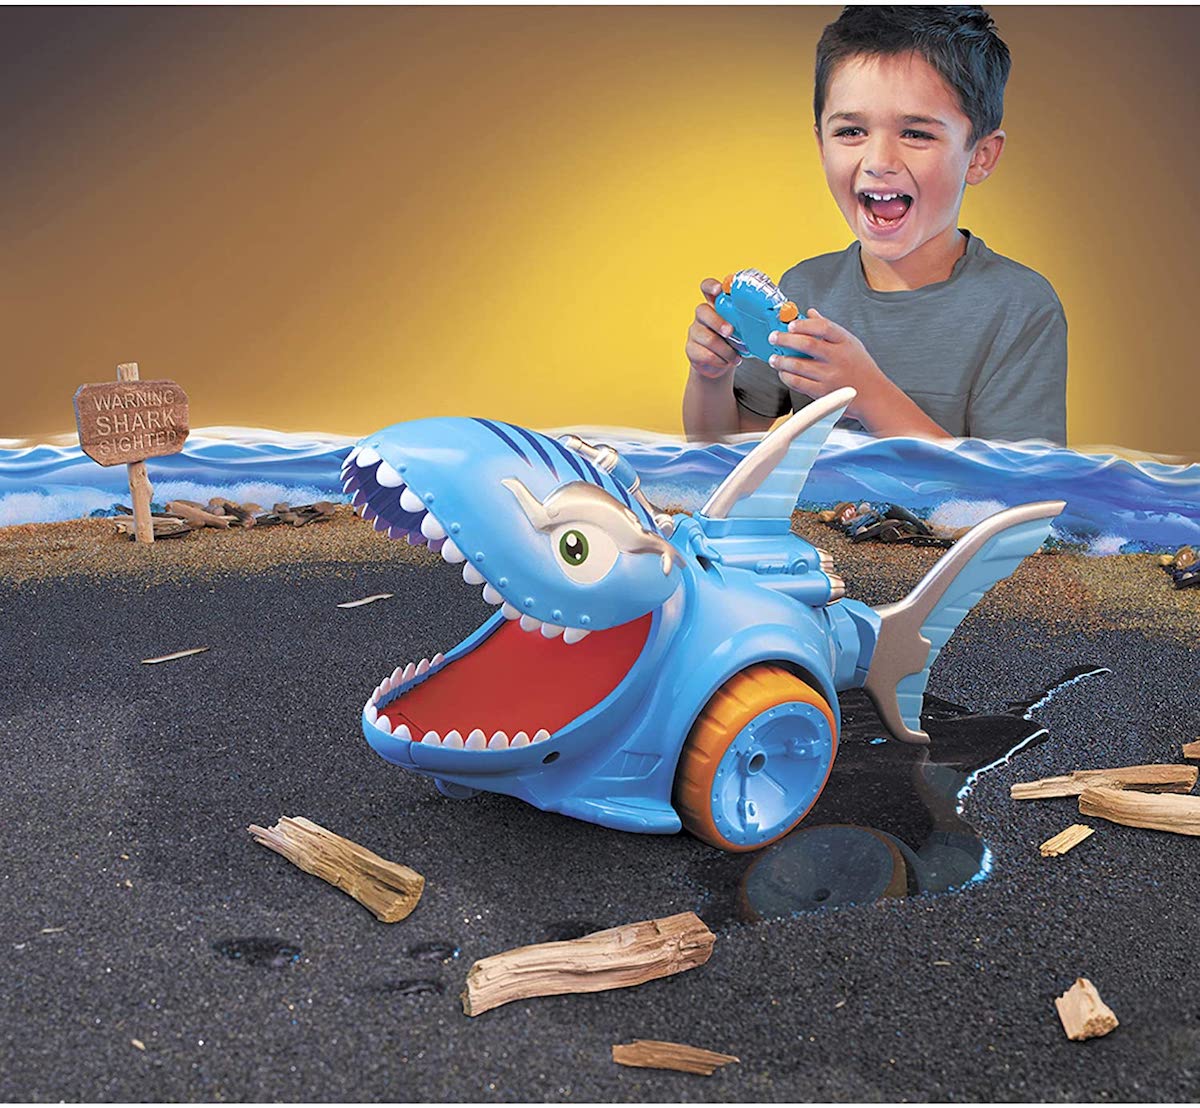 25 Santa Approved Coolest Toys For Kids This Christmas {2020}